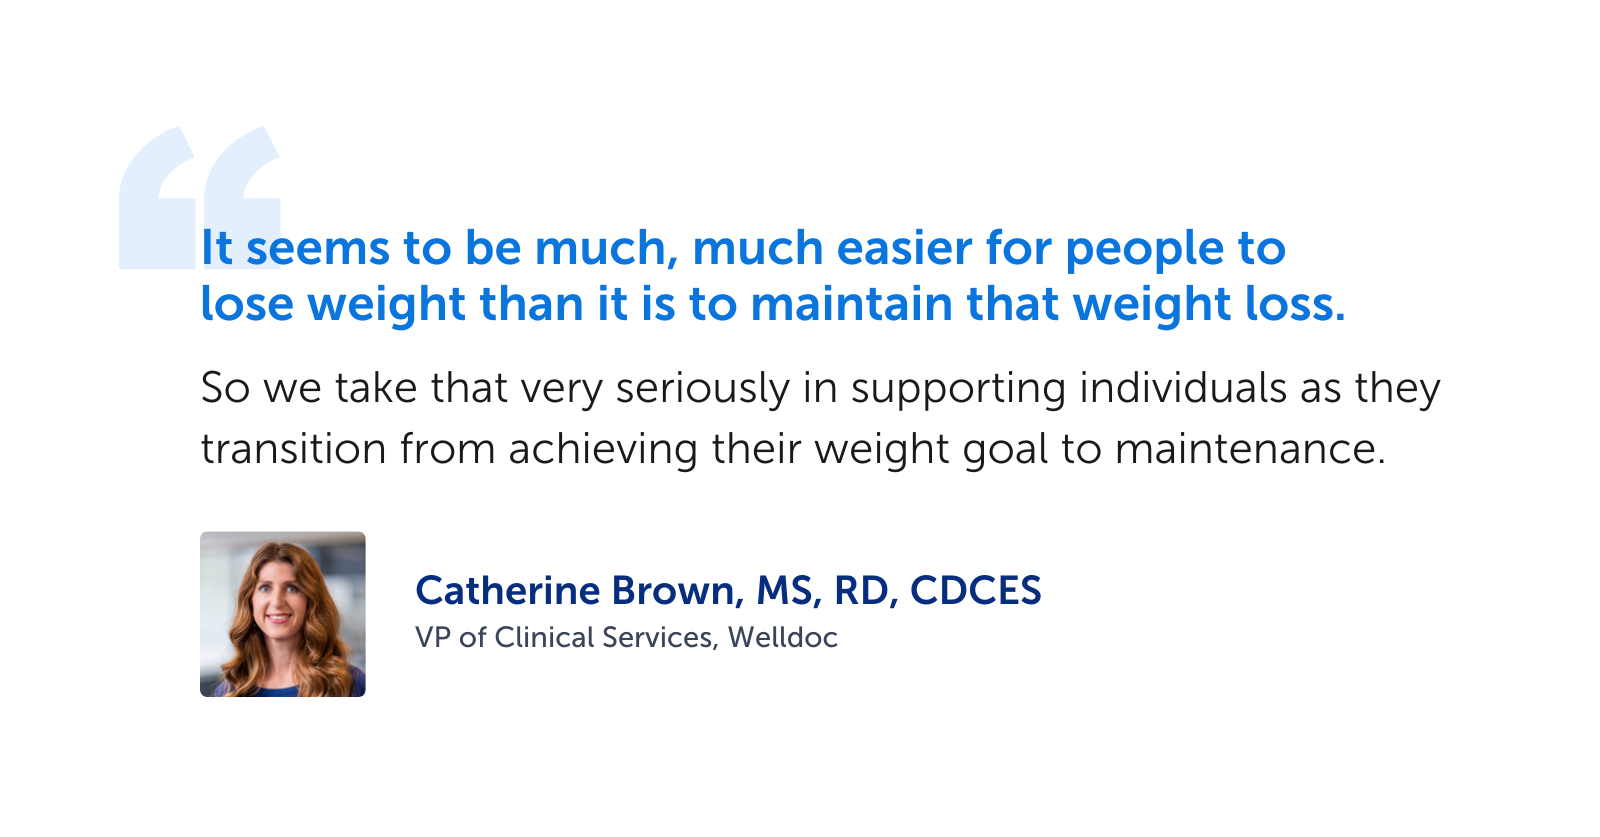 "It seems to be much, much easier for people to lose weight than it is to maintain that weight loss.  So we take that very seriously in supporting individuals as they transition from achieving their weight goal to maintenance." -Catherine Brown, MS, RD, CDCES, VP of Clinical Services, Welldoc
